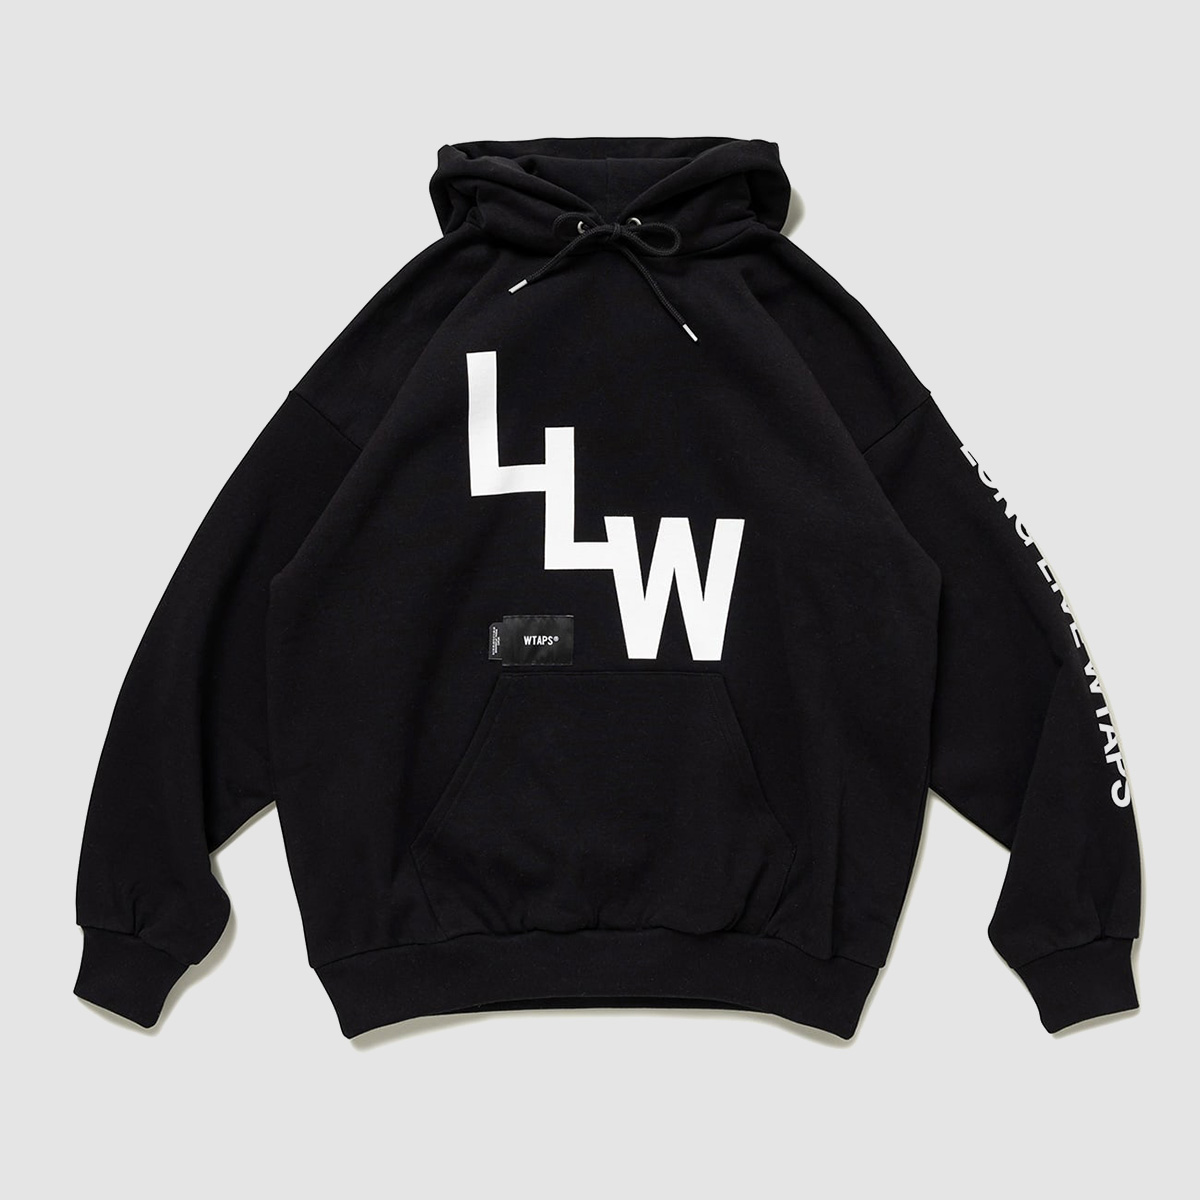 INVINCIBLE - LLW / HOODY / COTTON